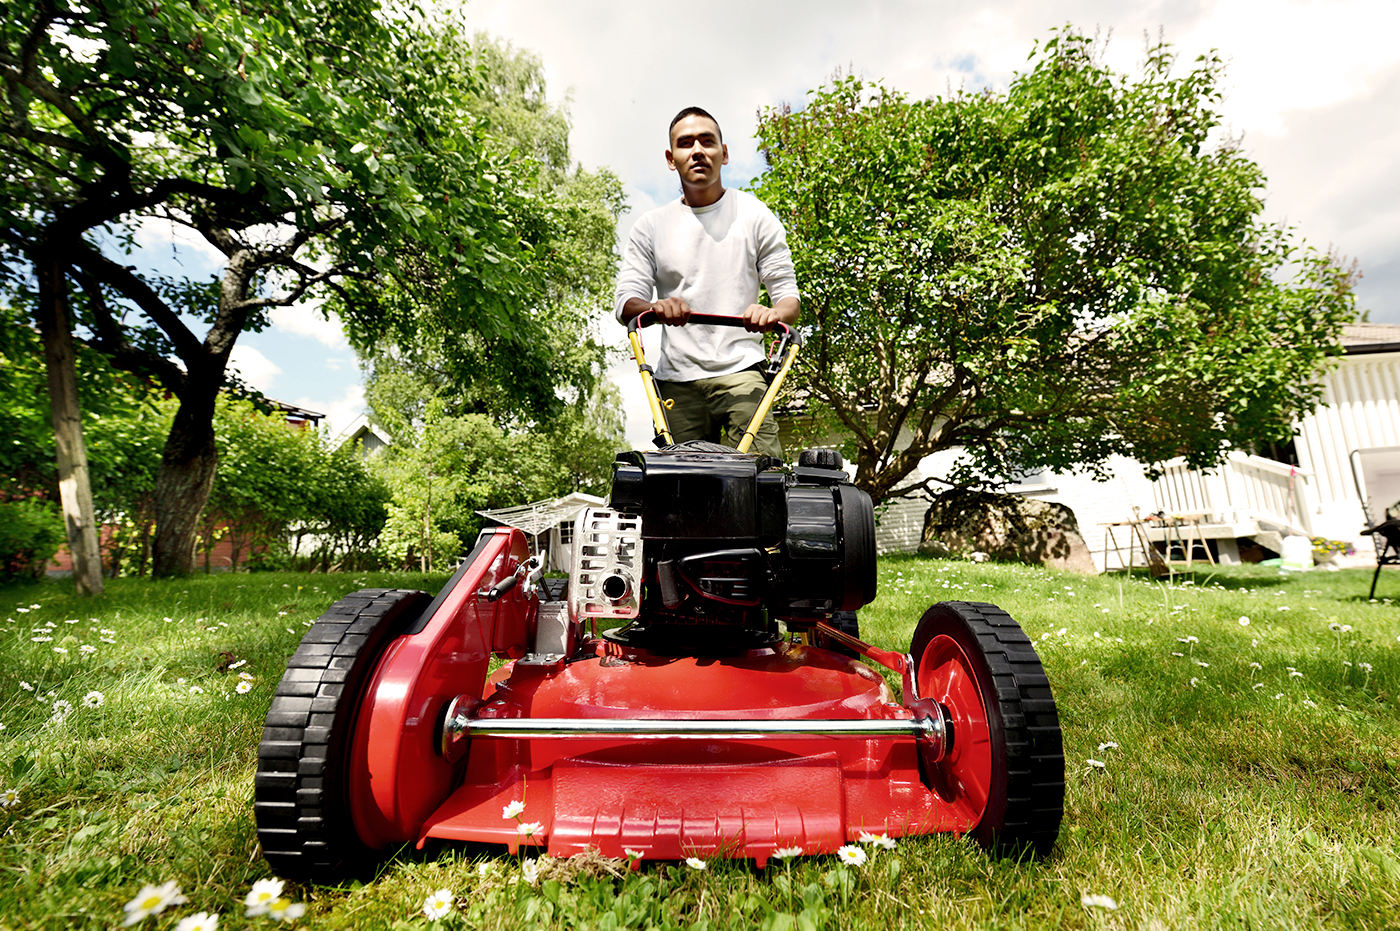 Close-up of a person using a push lawn mower.